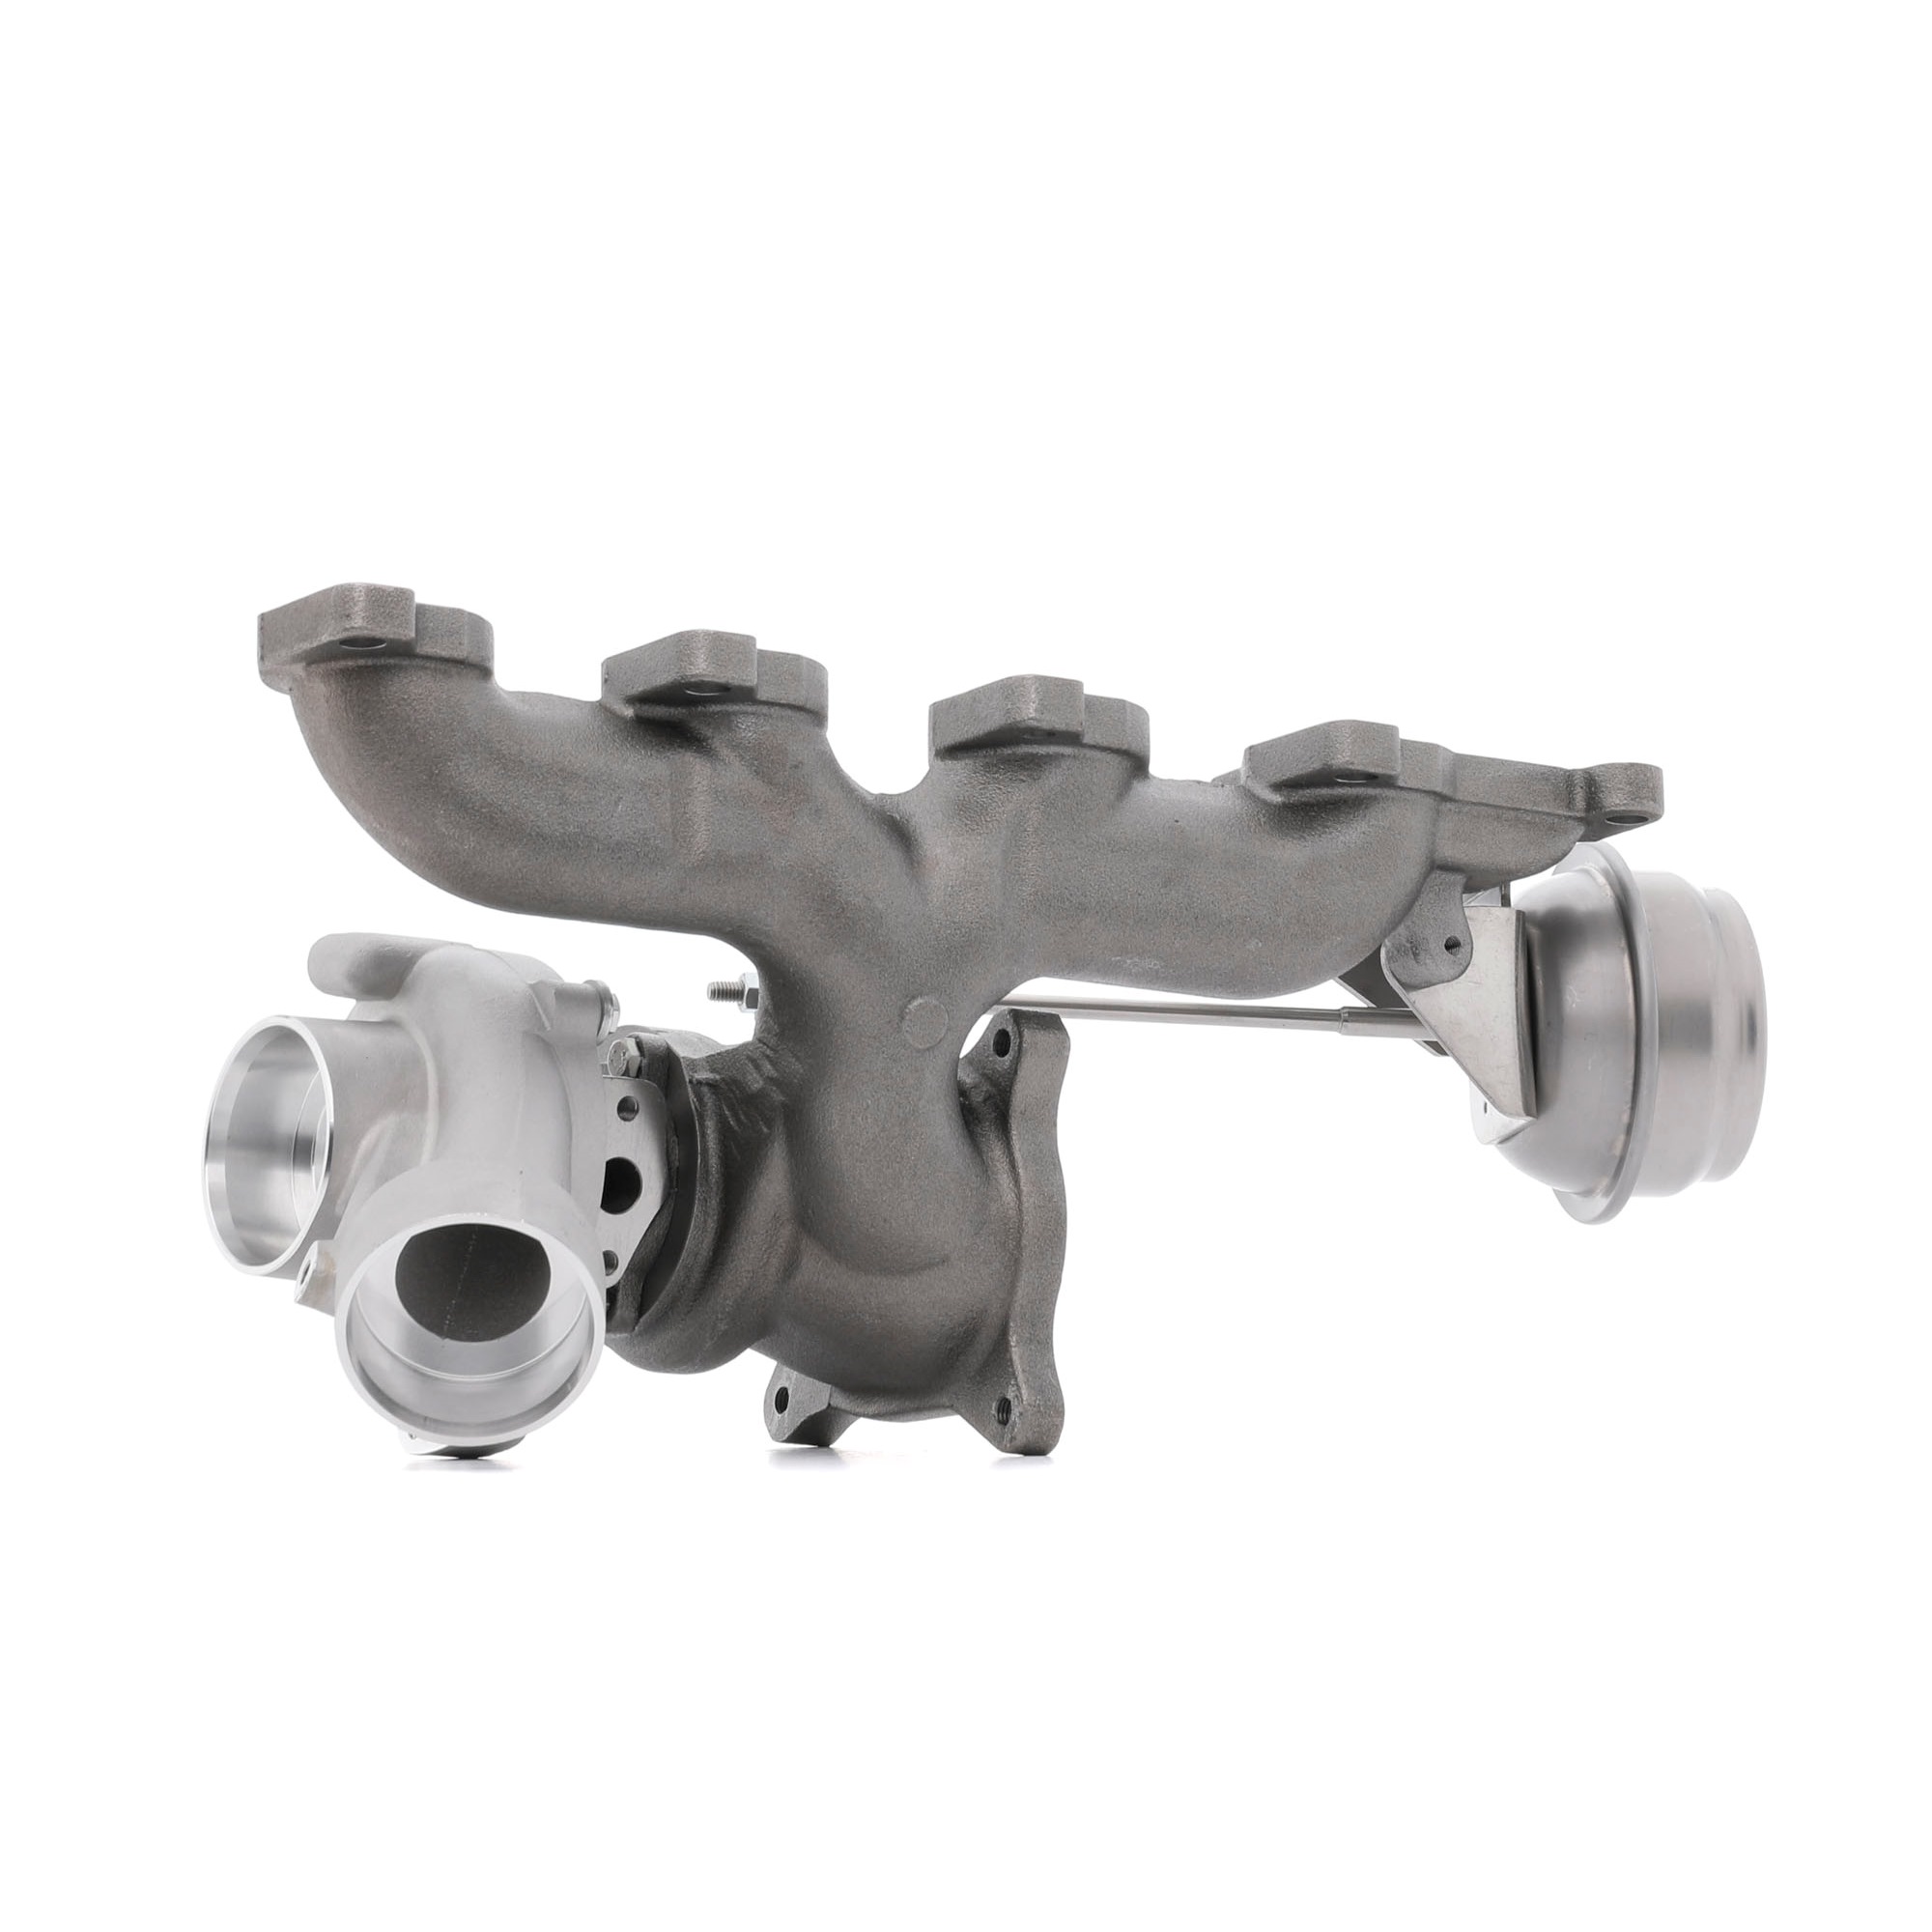 STARK Exhaust Turbocharger, Pneumatically controlled actuator, Pneumatic, Upper, with gaskets/seals Turbo SKCT-1190550 buy